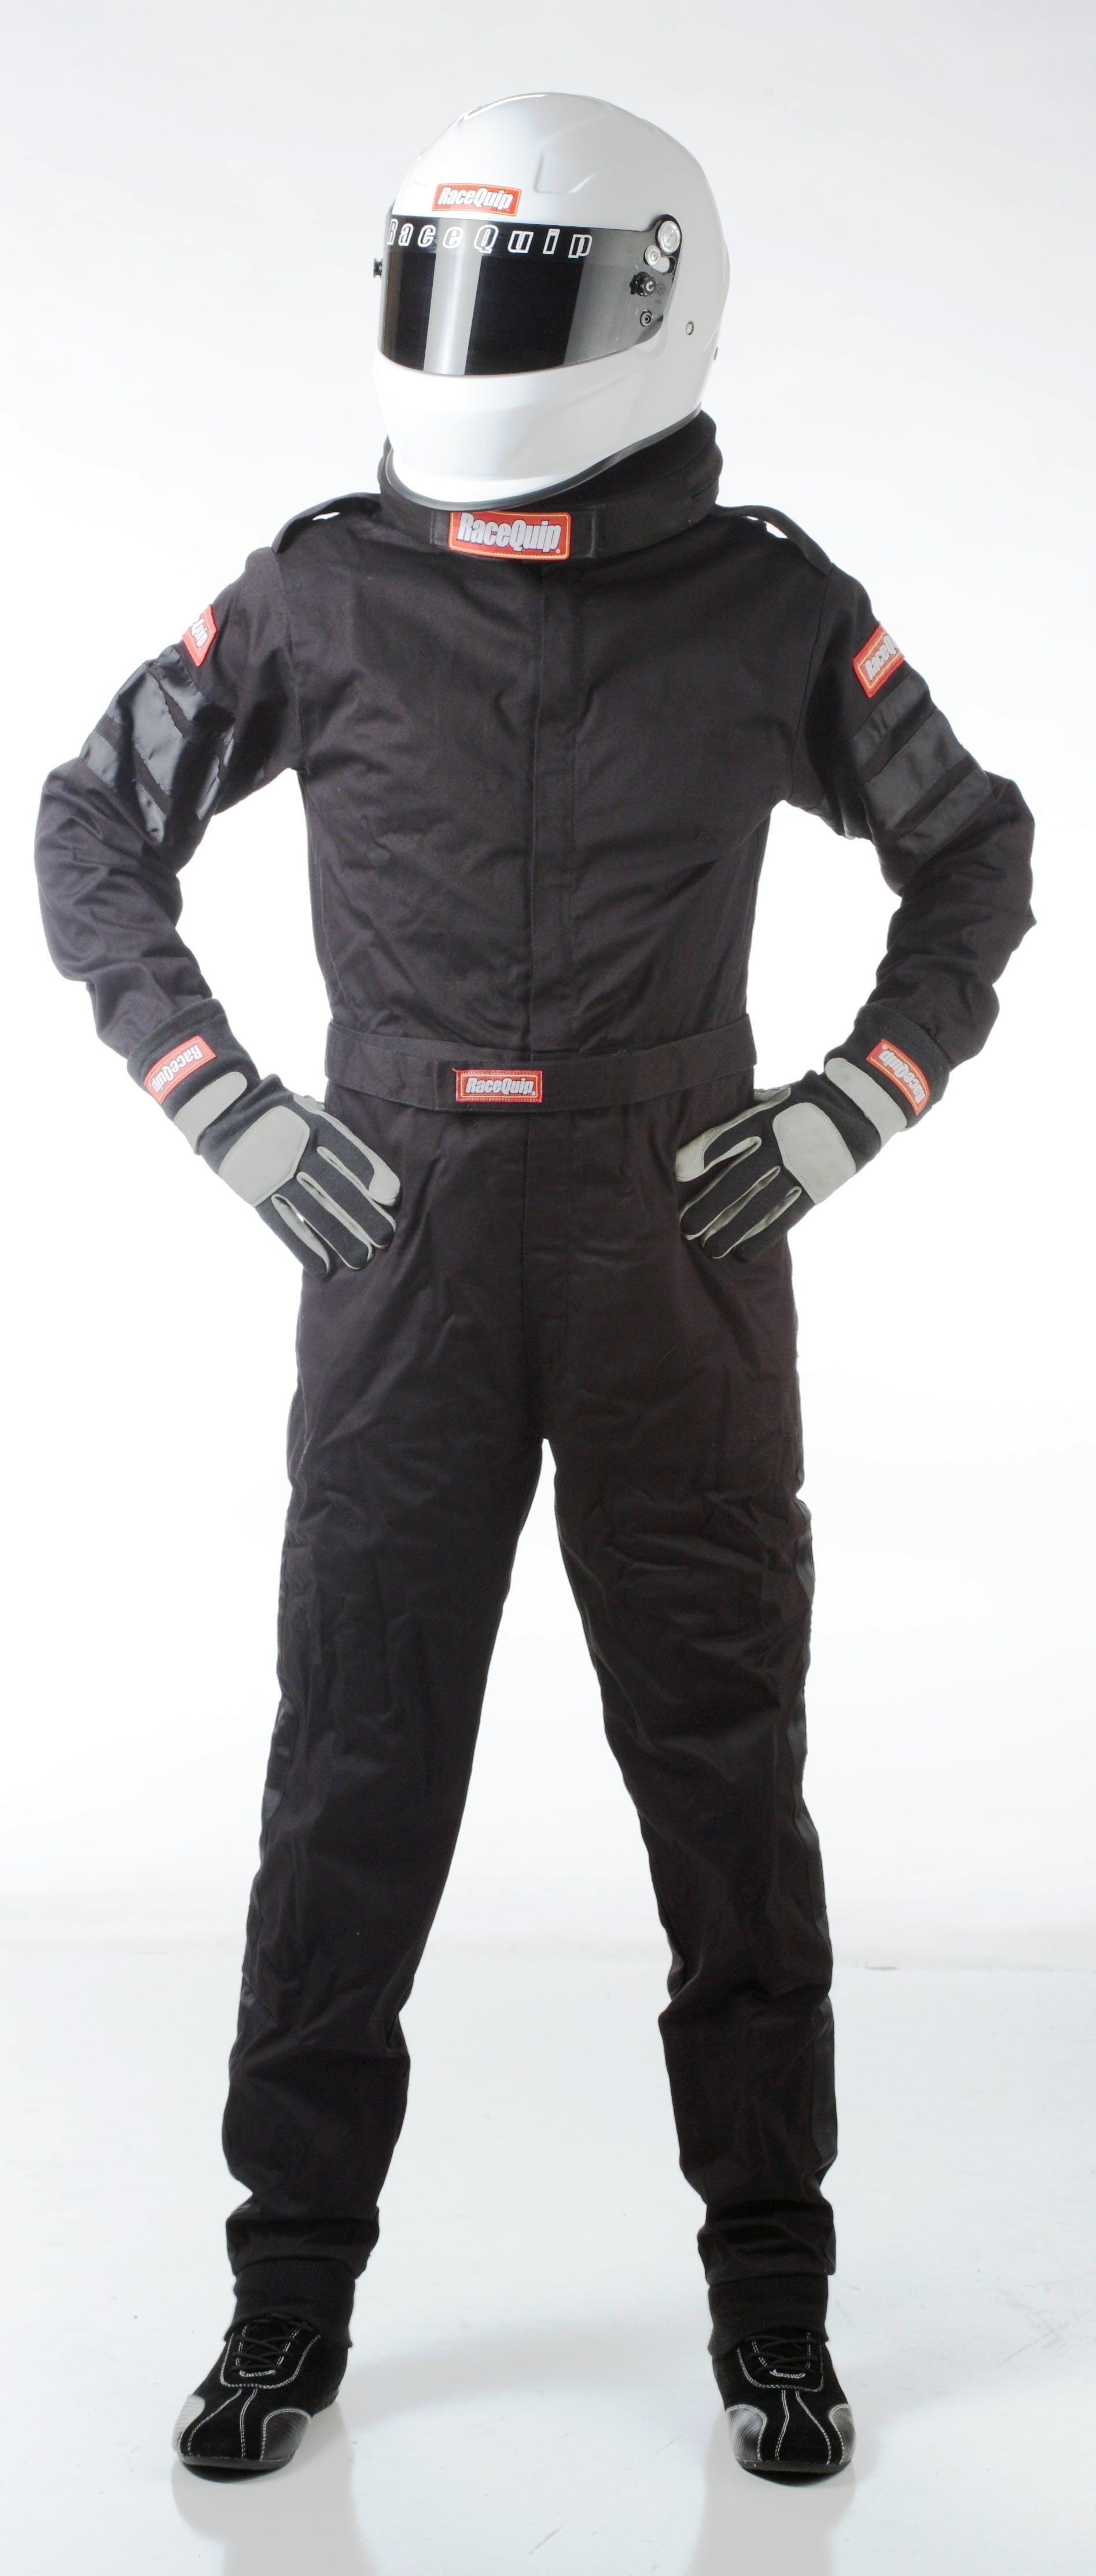 RaceQuip 110002 SFI-1 Pyrovatex One-Piece Single-Layer Racing Fire Suit (Black, Small)